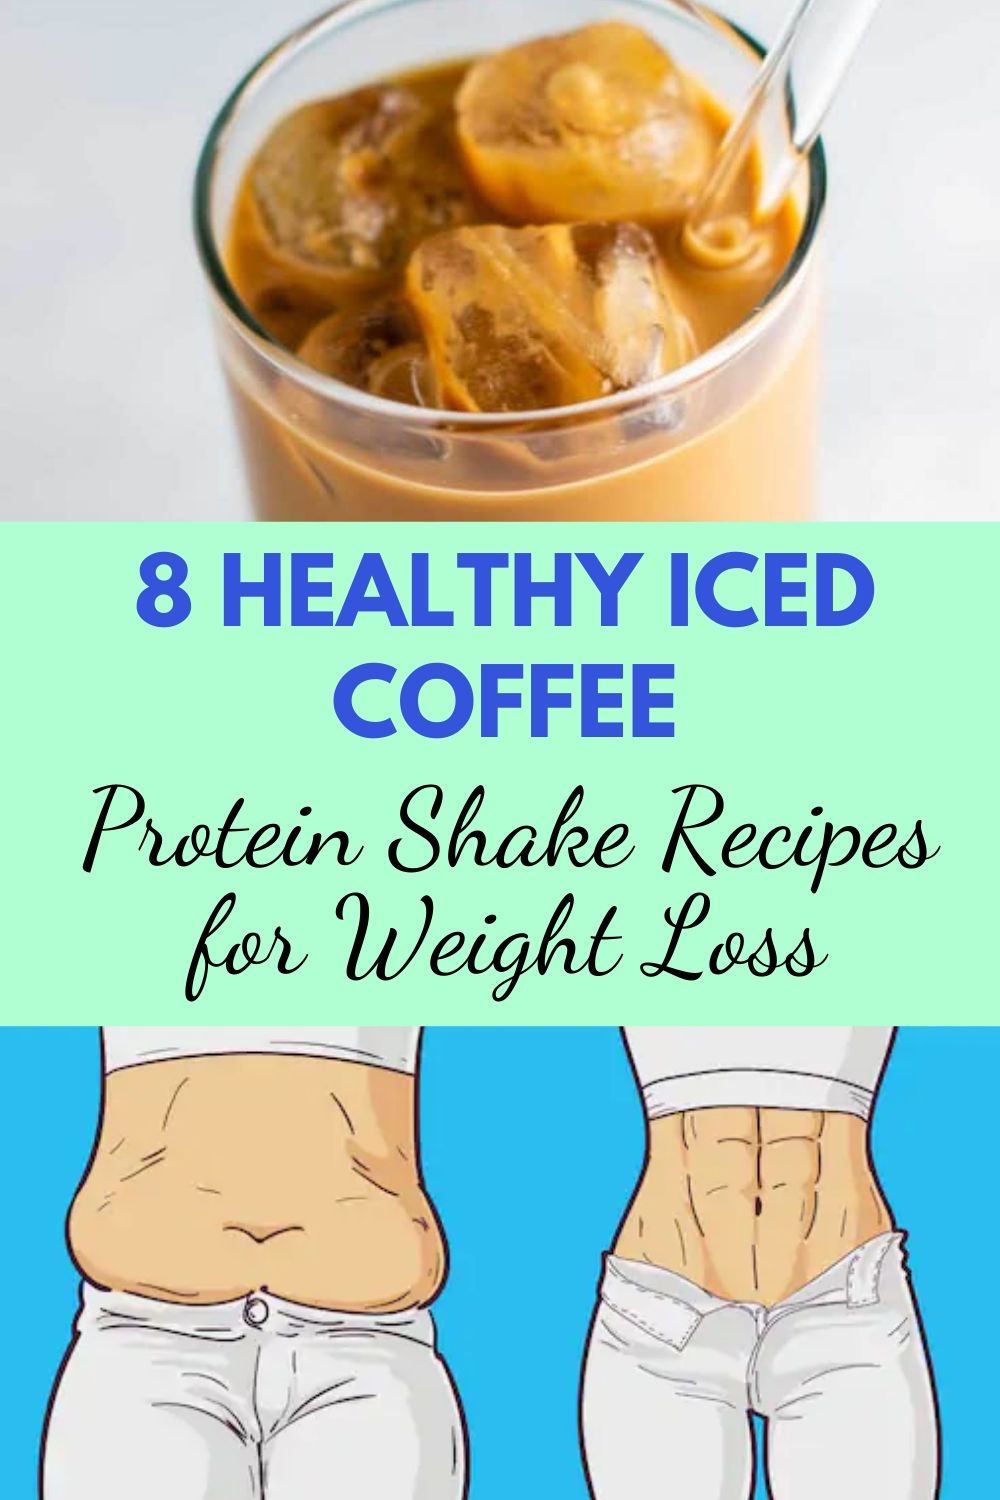 8 Healthy Iced Coffee Protein Shake Recipes for Weight Loss